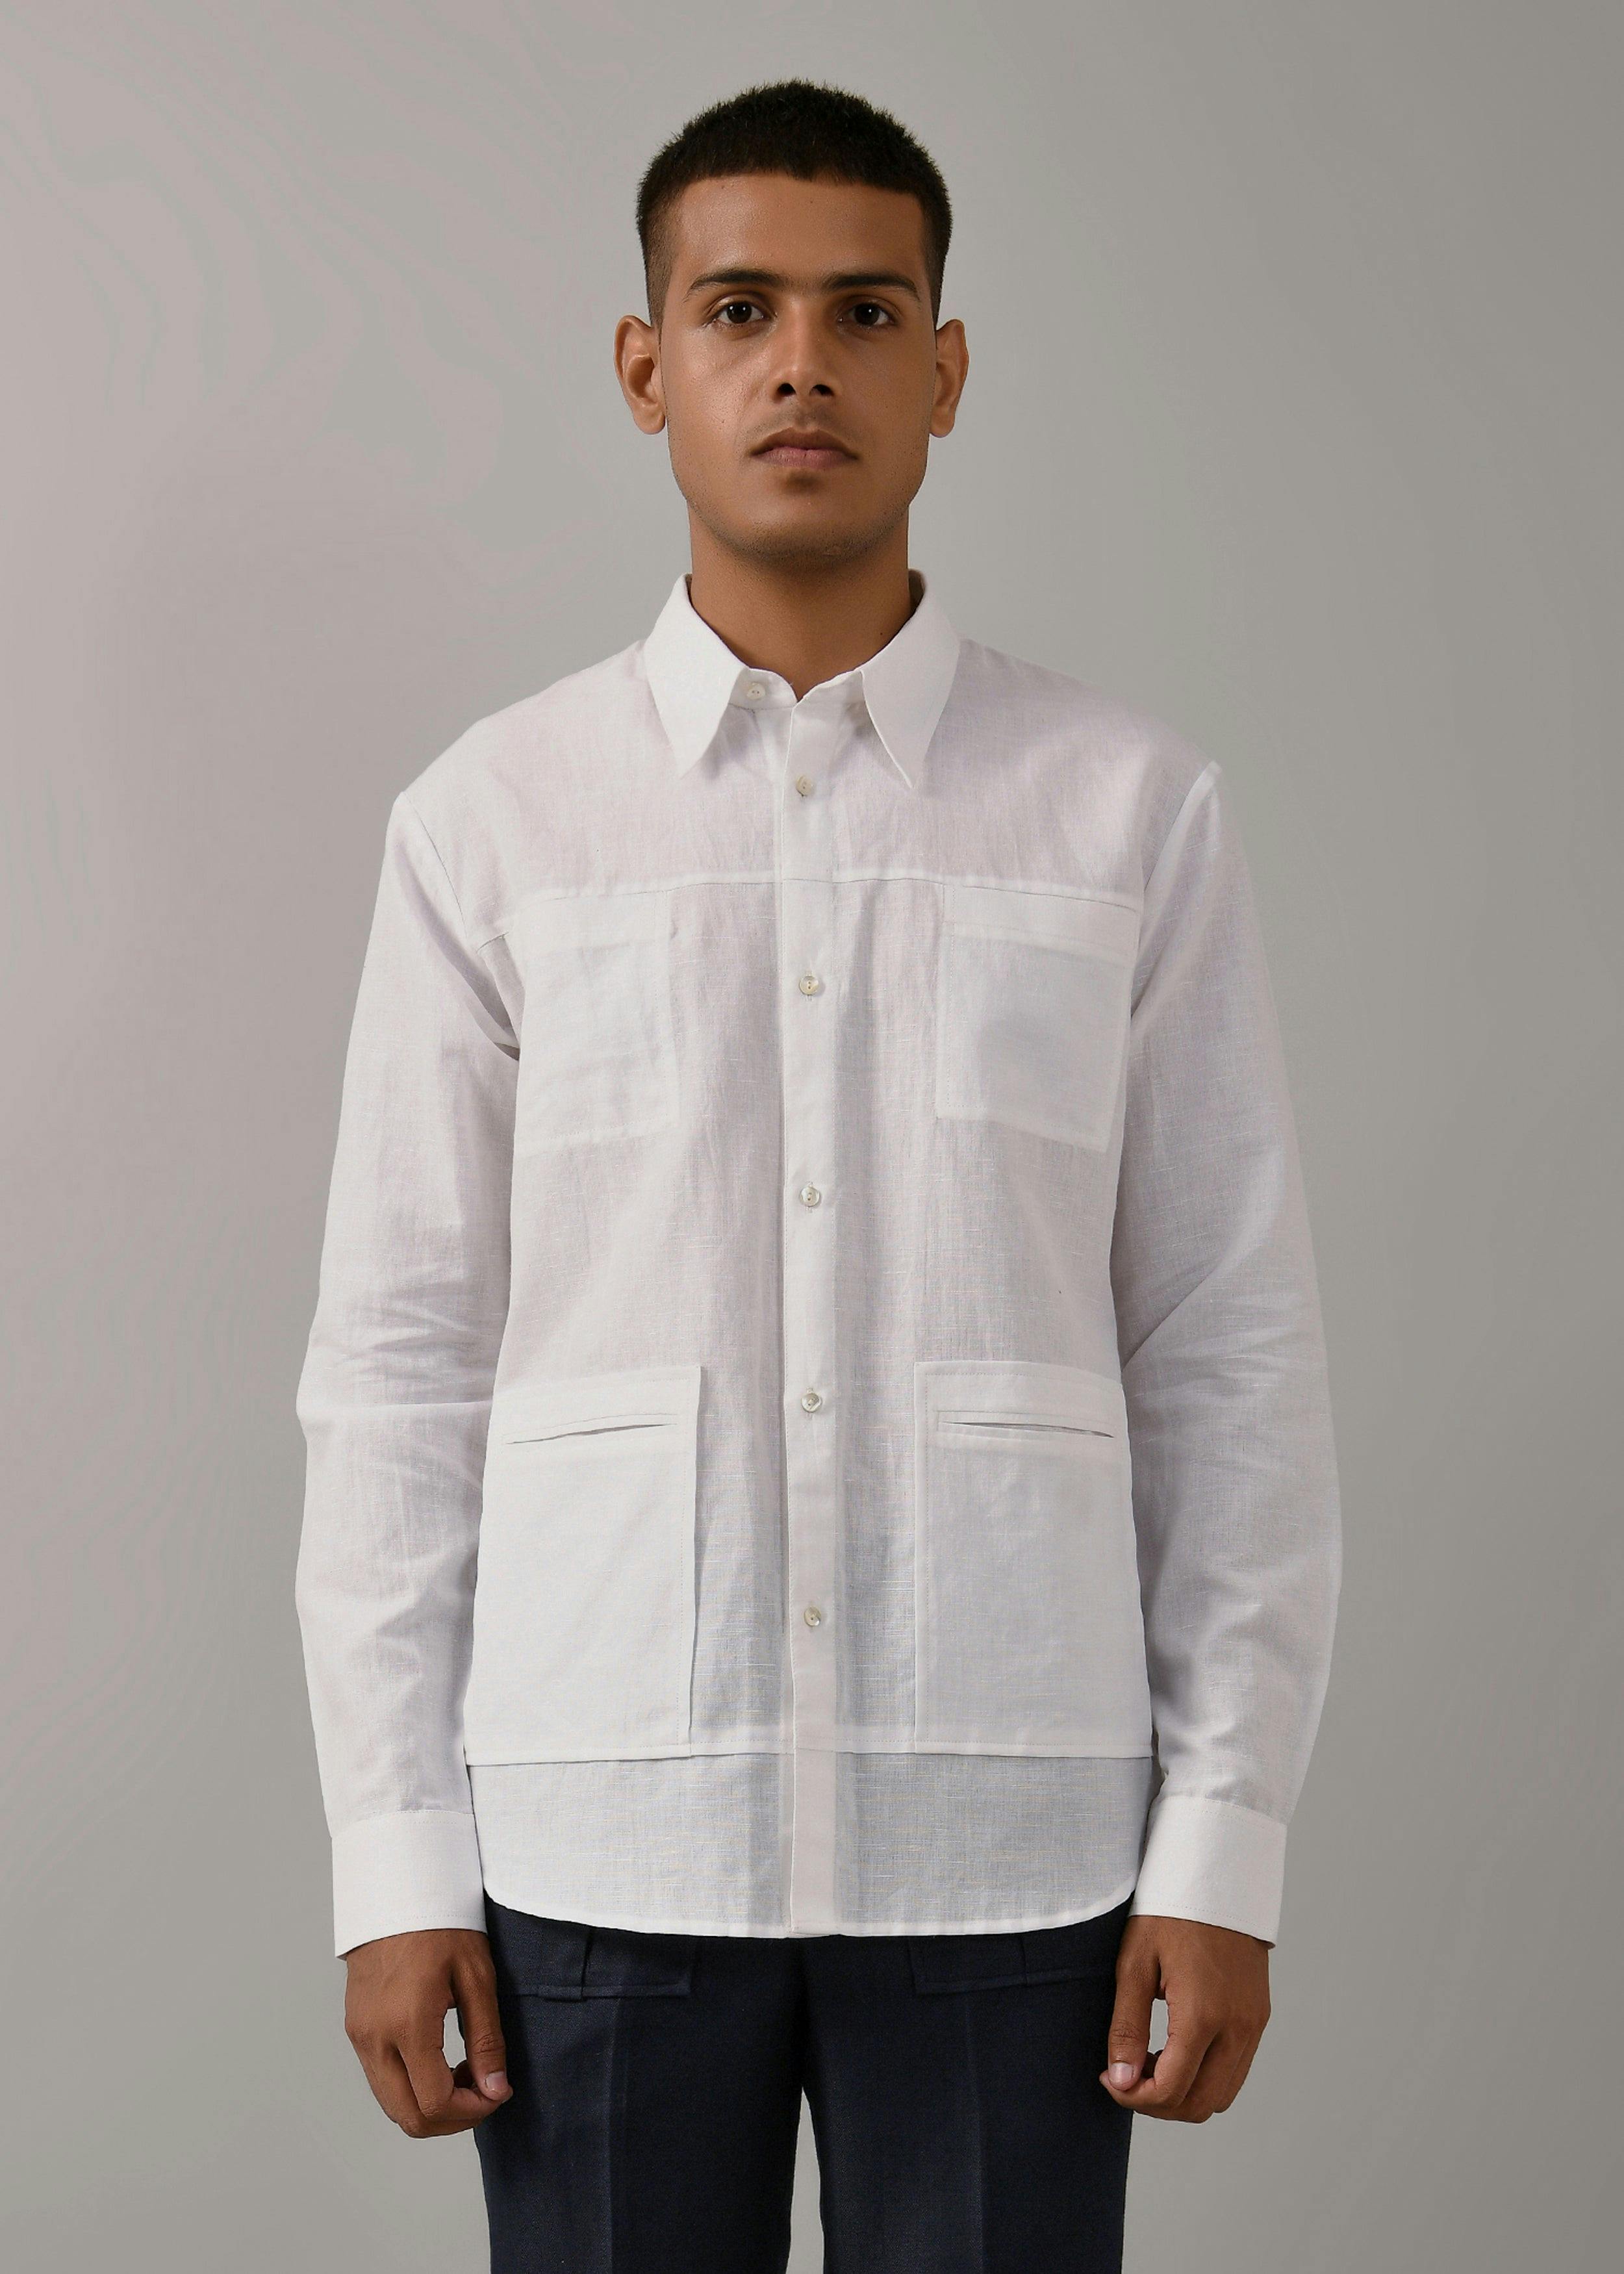 Classic 4 pocket shirt, a product by Country Made